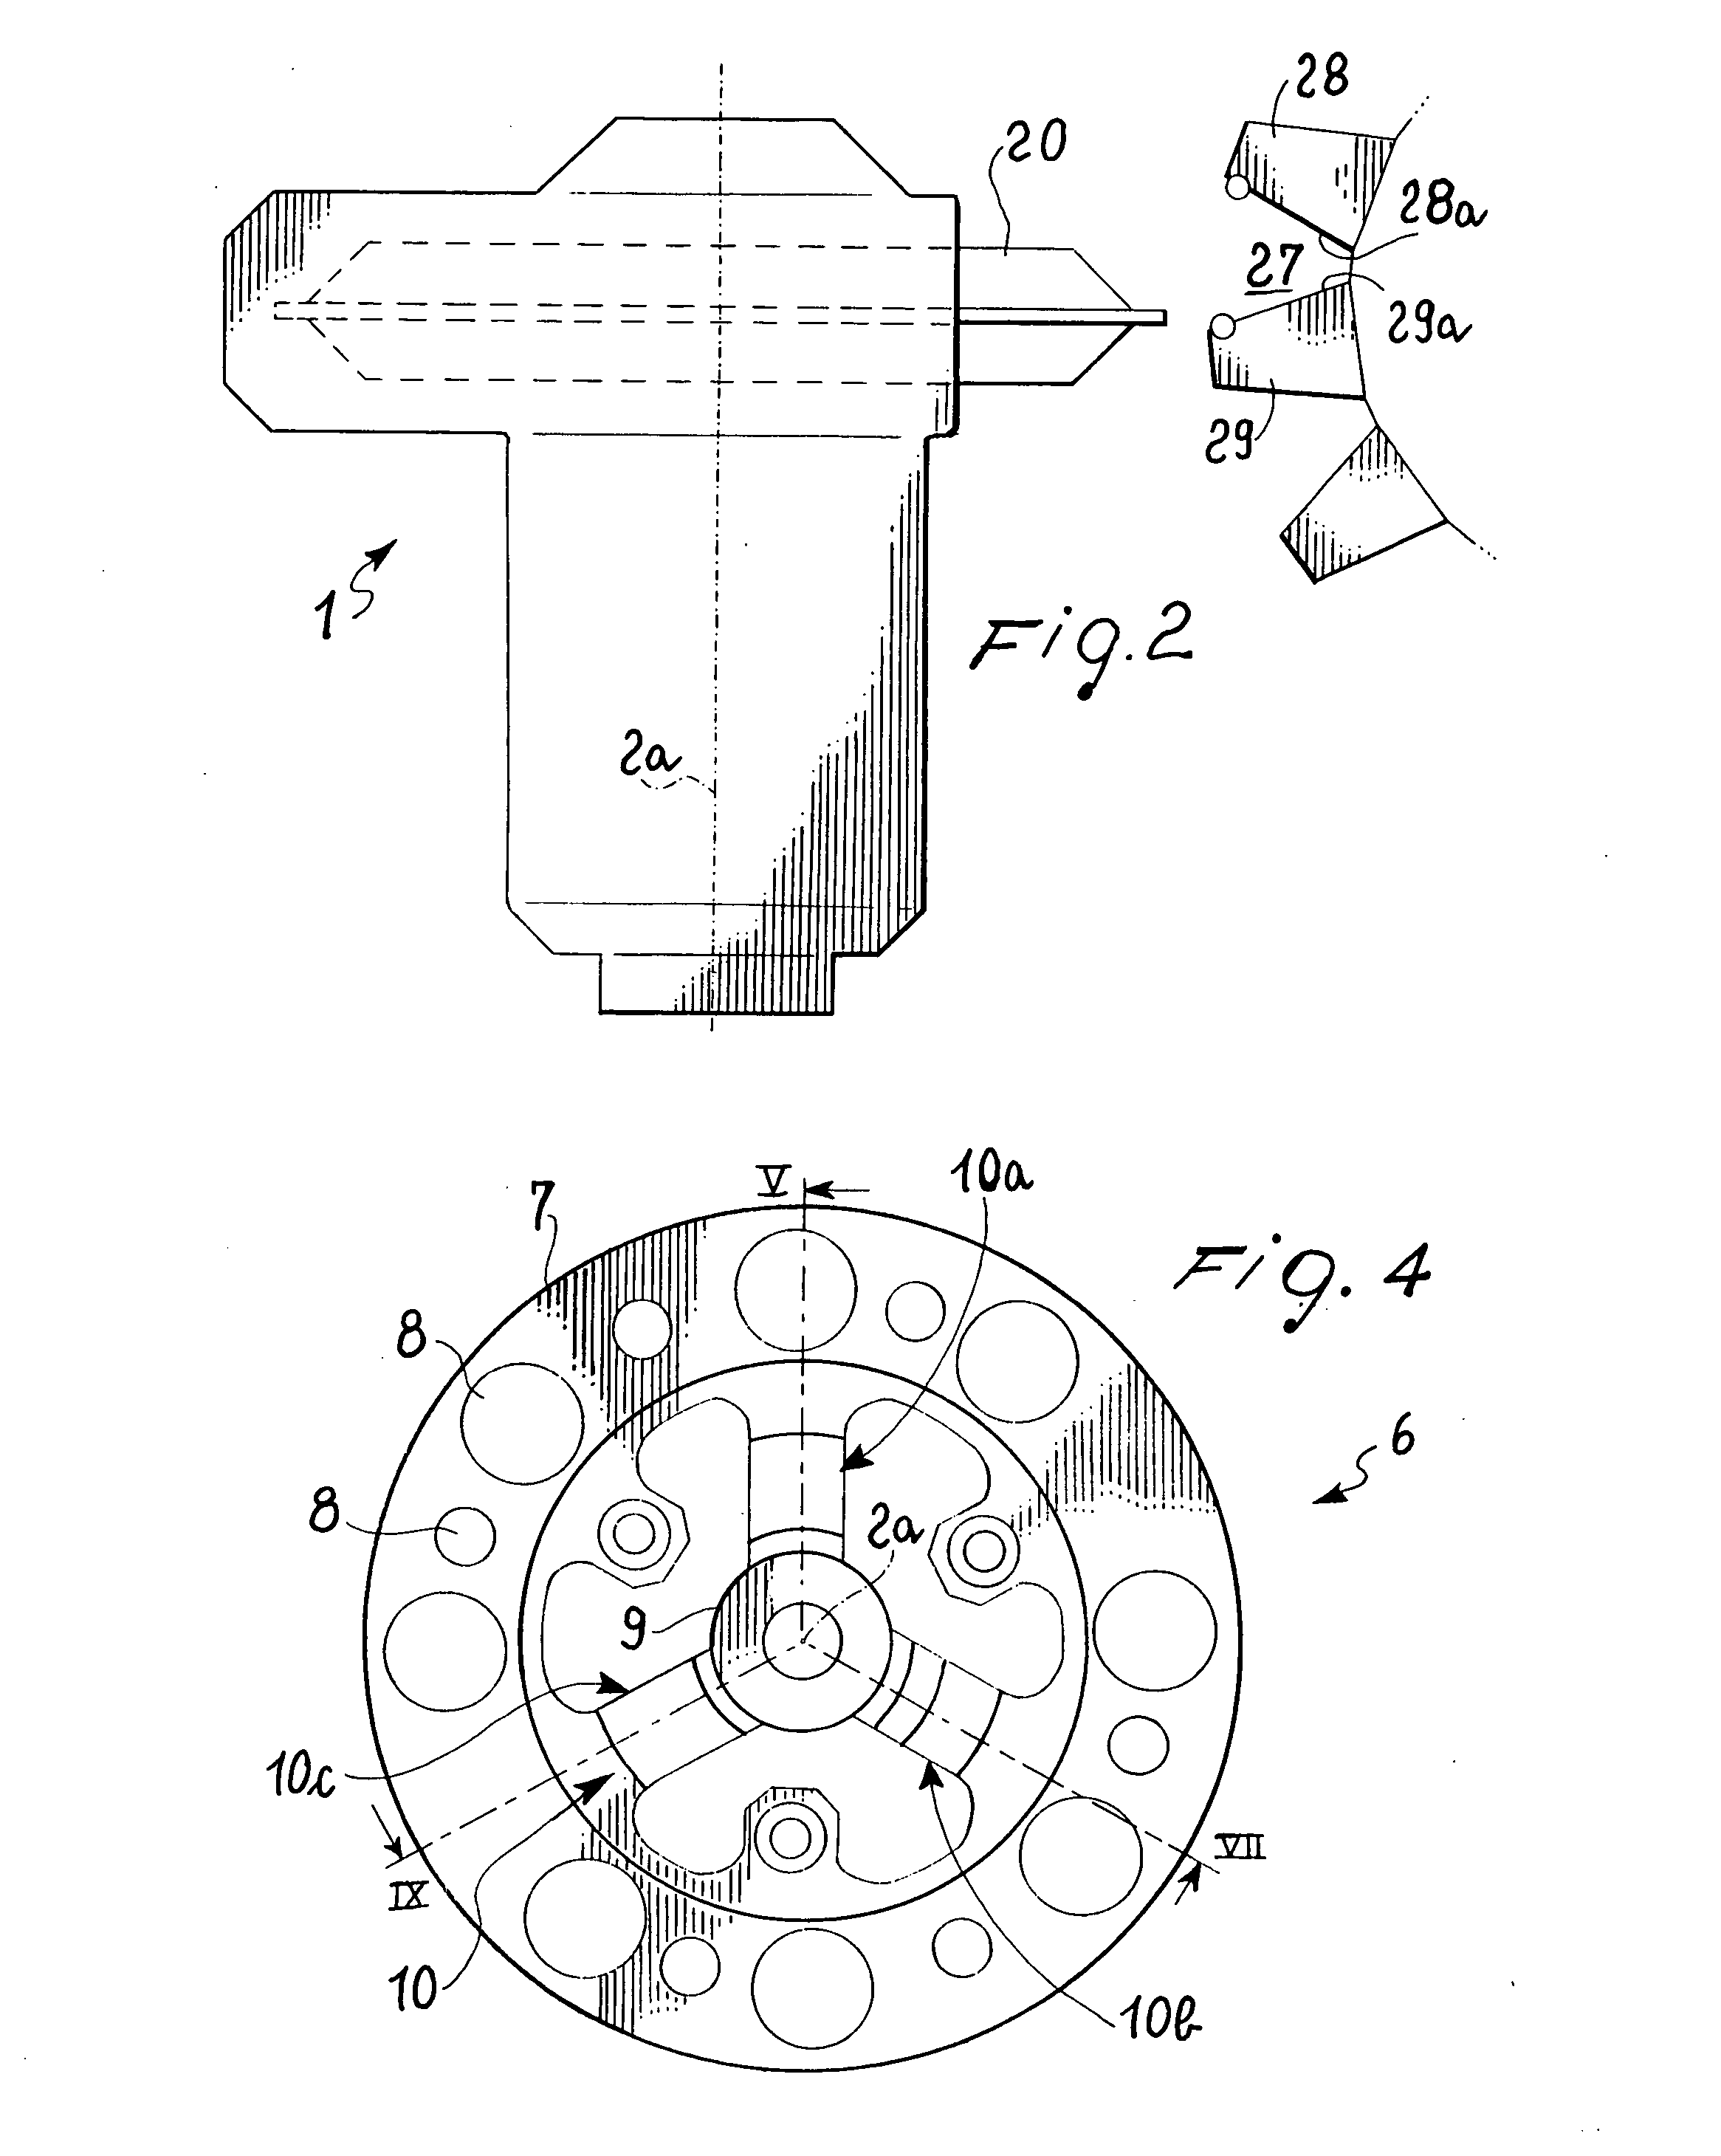 Apparatus for detecting vibrations in a machine tool